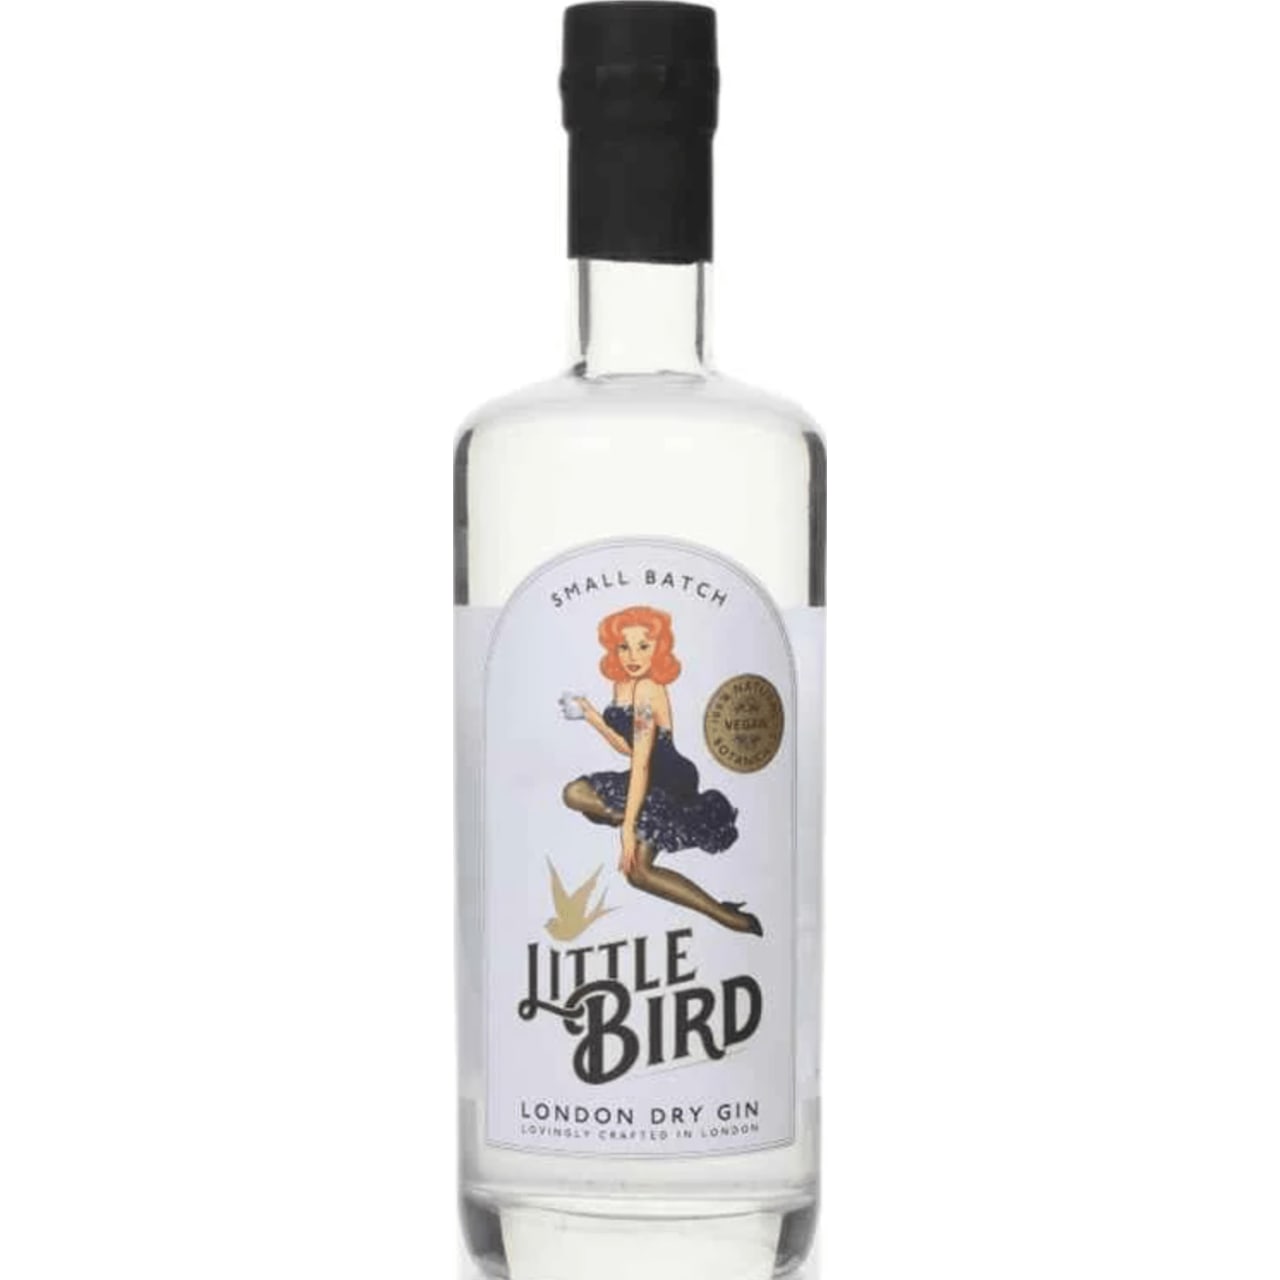 Little Bird is made using 10 carefully selected botanicals, resulting in a well rounded, citrus-forward London Dry Gin that goes just splendidly in a classic G&T and other bright, gin-based cocktails.